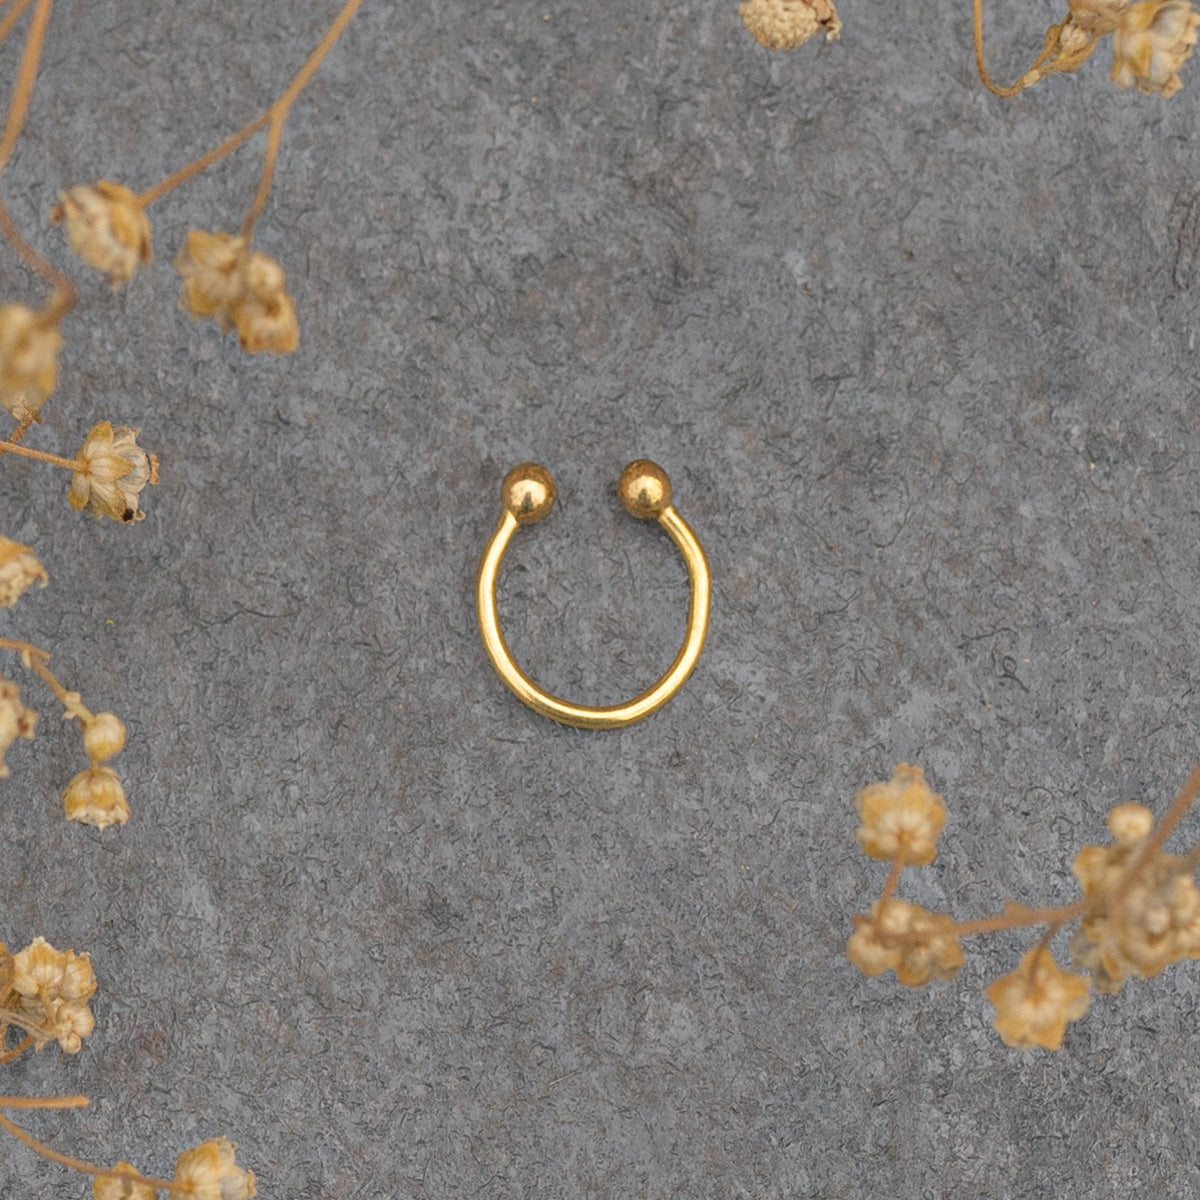 Buy Sterling Silver Nose Ring Seamless Plain Nose Ring Hoop With Ball Gold Nose  Hoop Piercing Sterling Silver Nose Ring Jewelry Nose Piercing Online in  India - Etsy